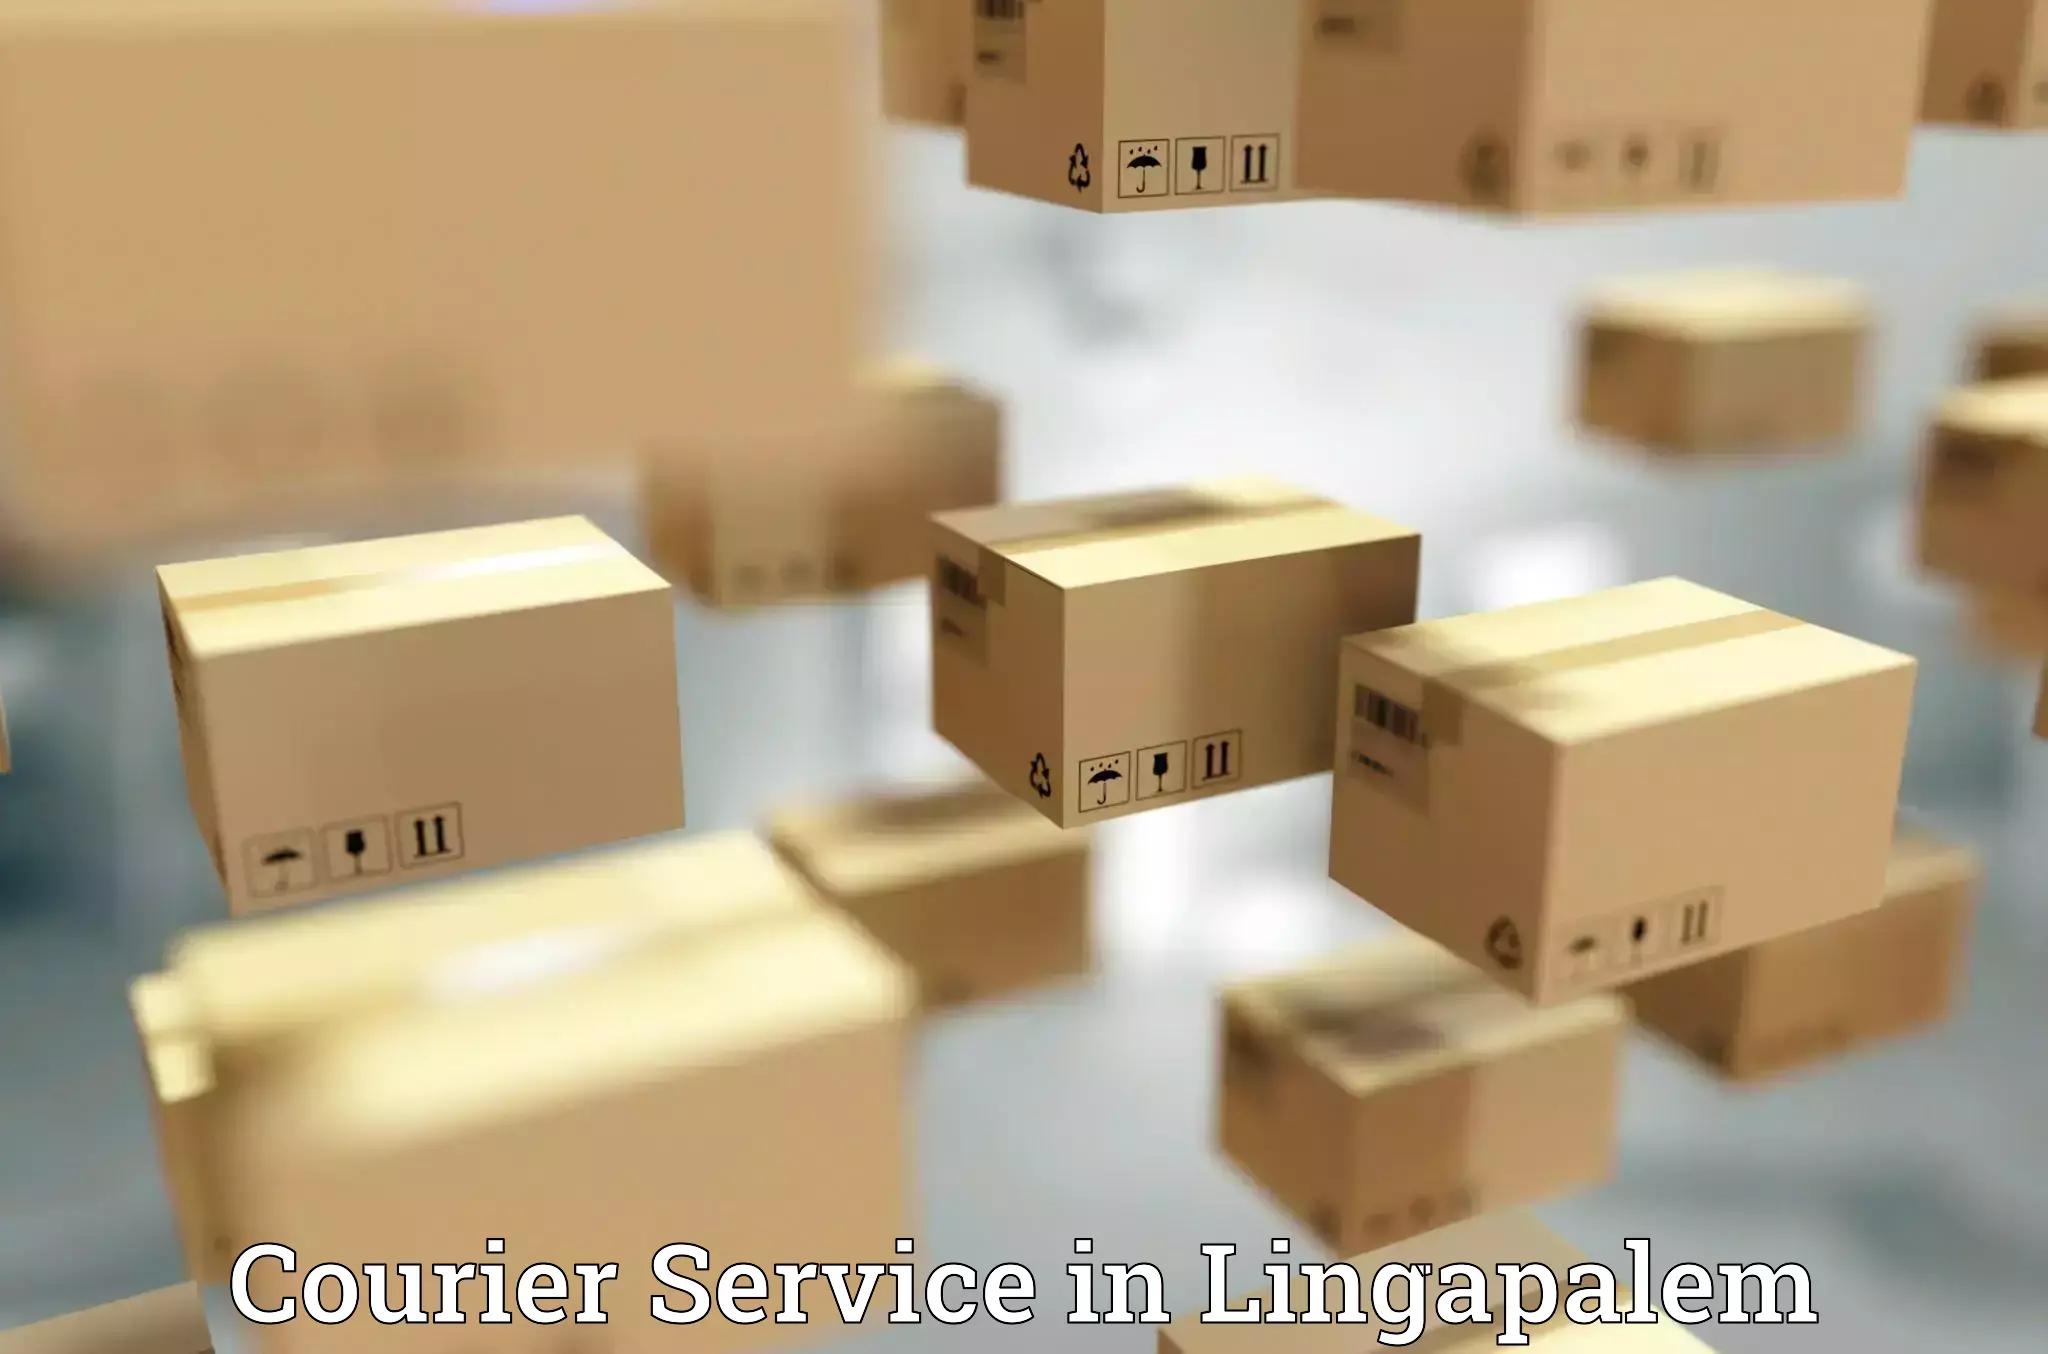 Full-service courier options in Lingapalem